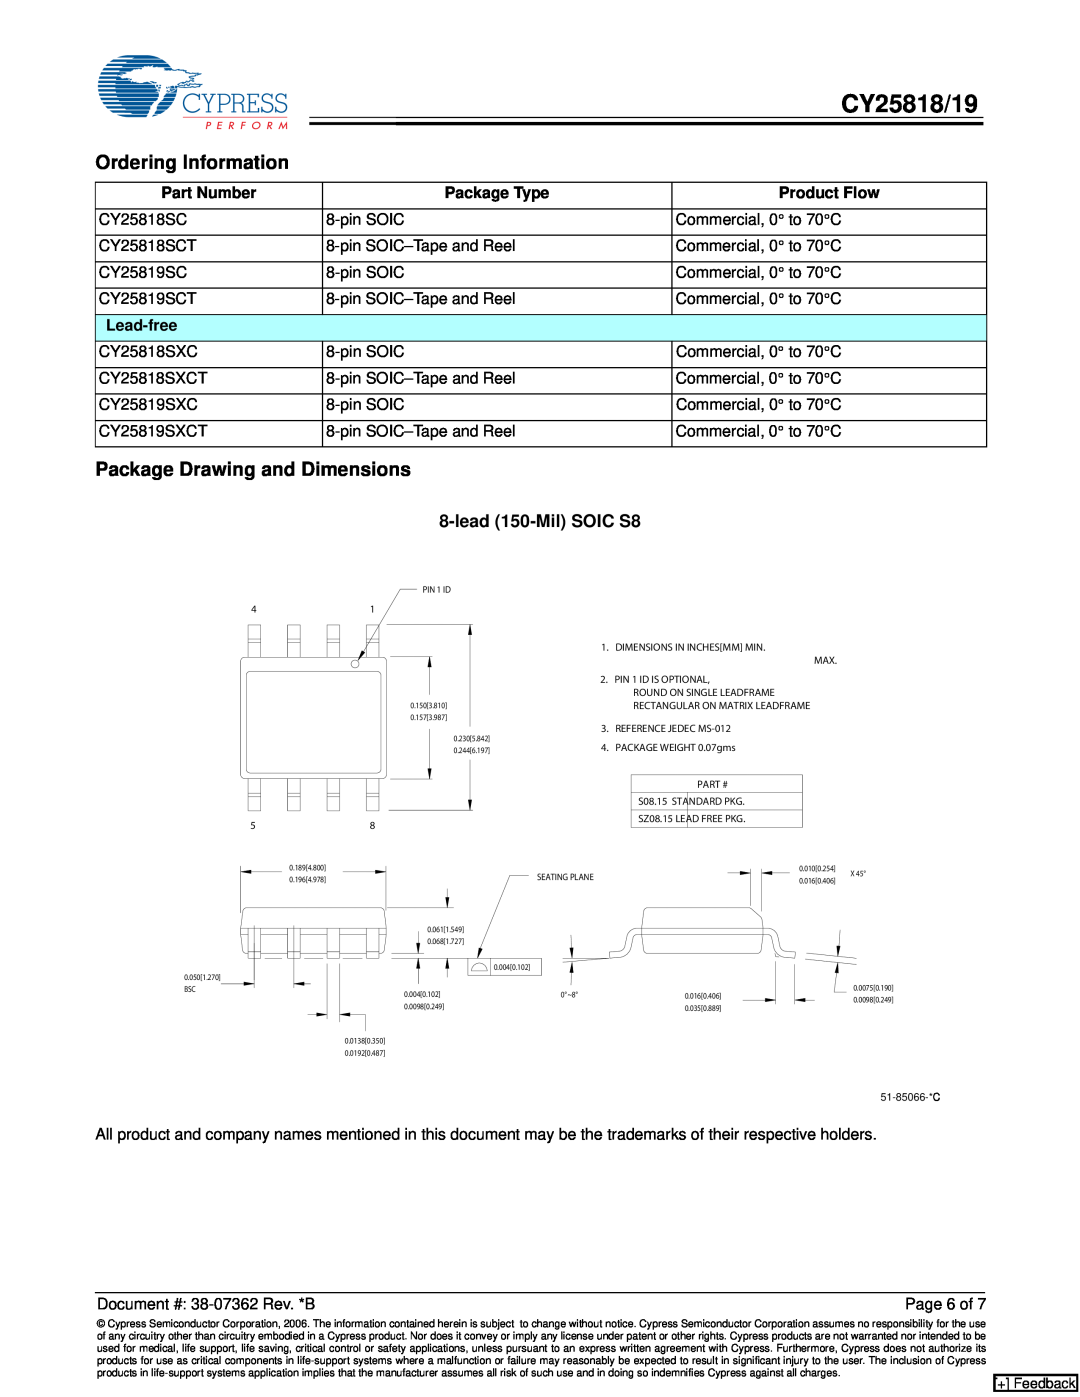 Cypress CY25819 manual Ordering Information, Package Drawing and Dimensions, CY25818/19, lead 150-Mil SOIC S8 